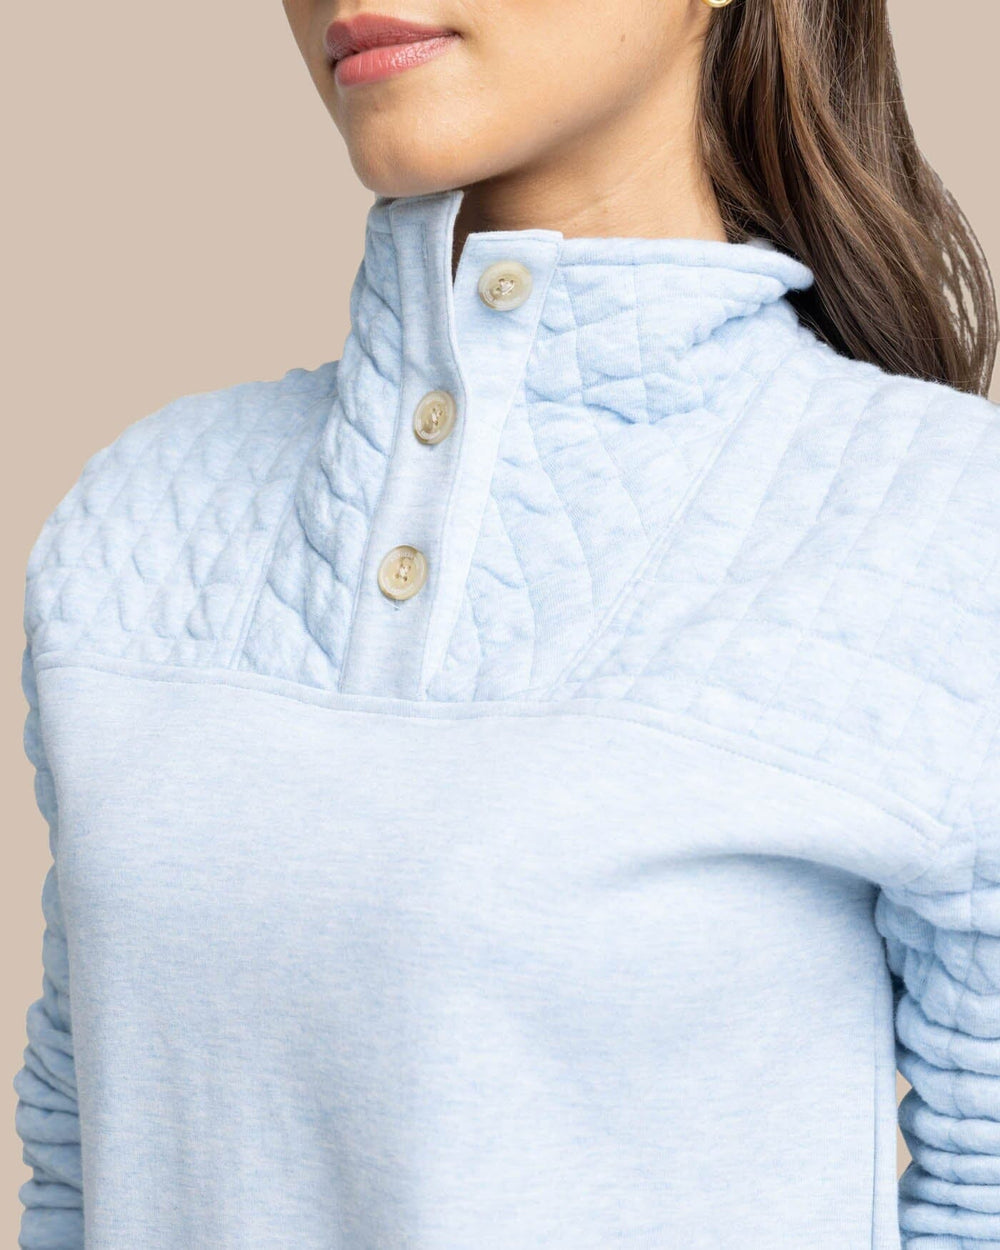 The detail view of the Southern Tide Kelsea Quilted Heather Pullover by Southern Tide - Heather Dream Blue